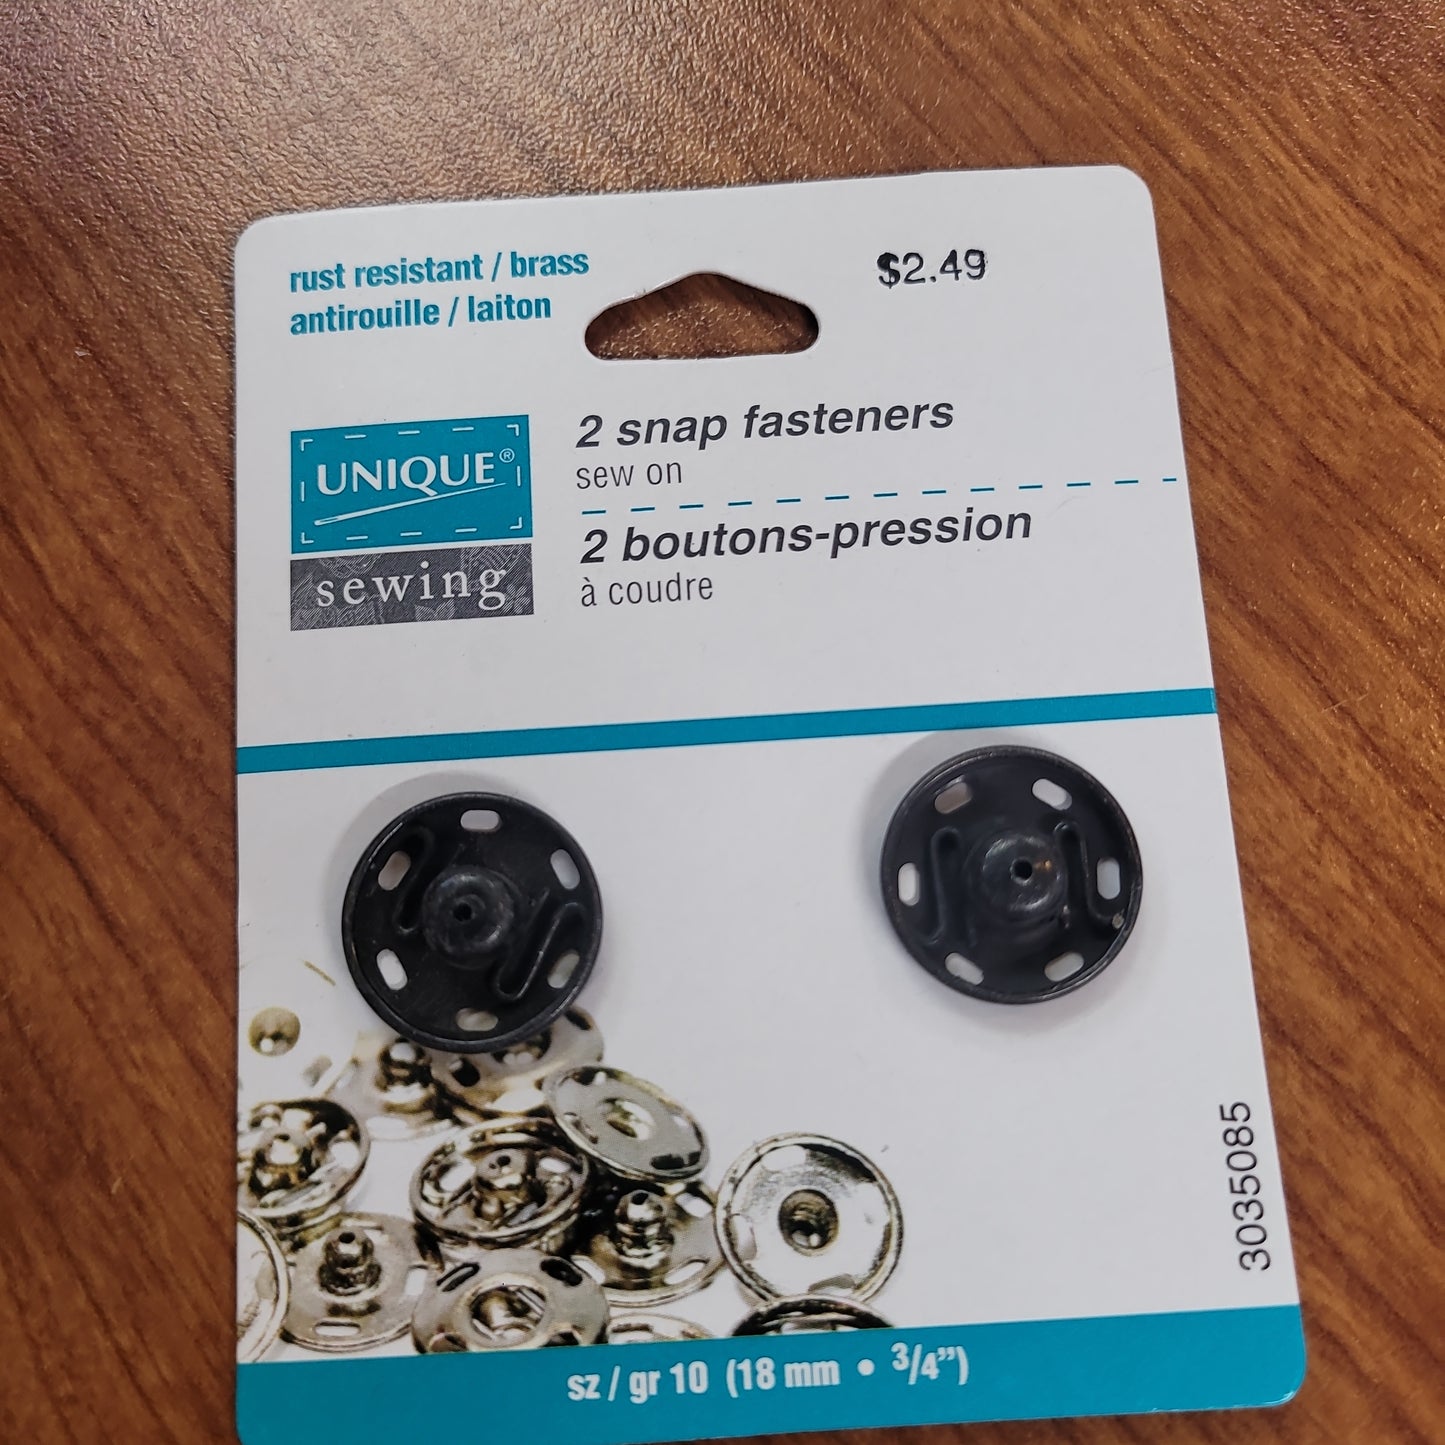 UNIQUE SEWING Snap Fasteners Black - size 18mm (3⁄4″) - 2 sets